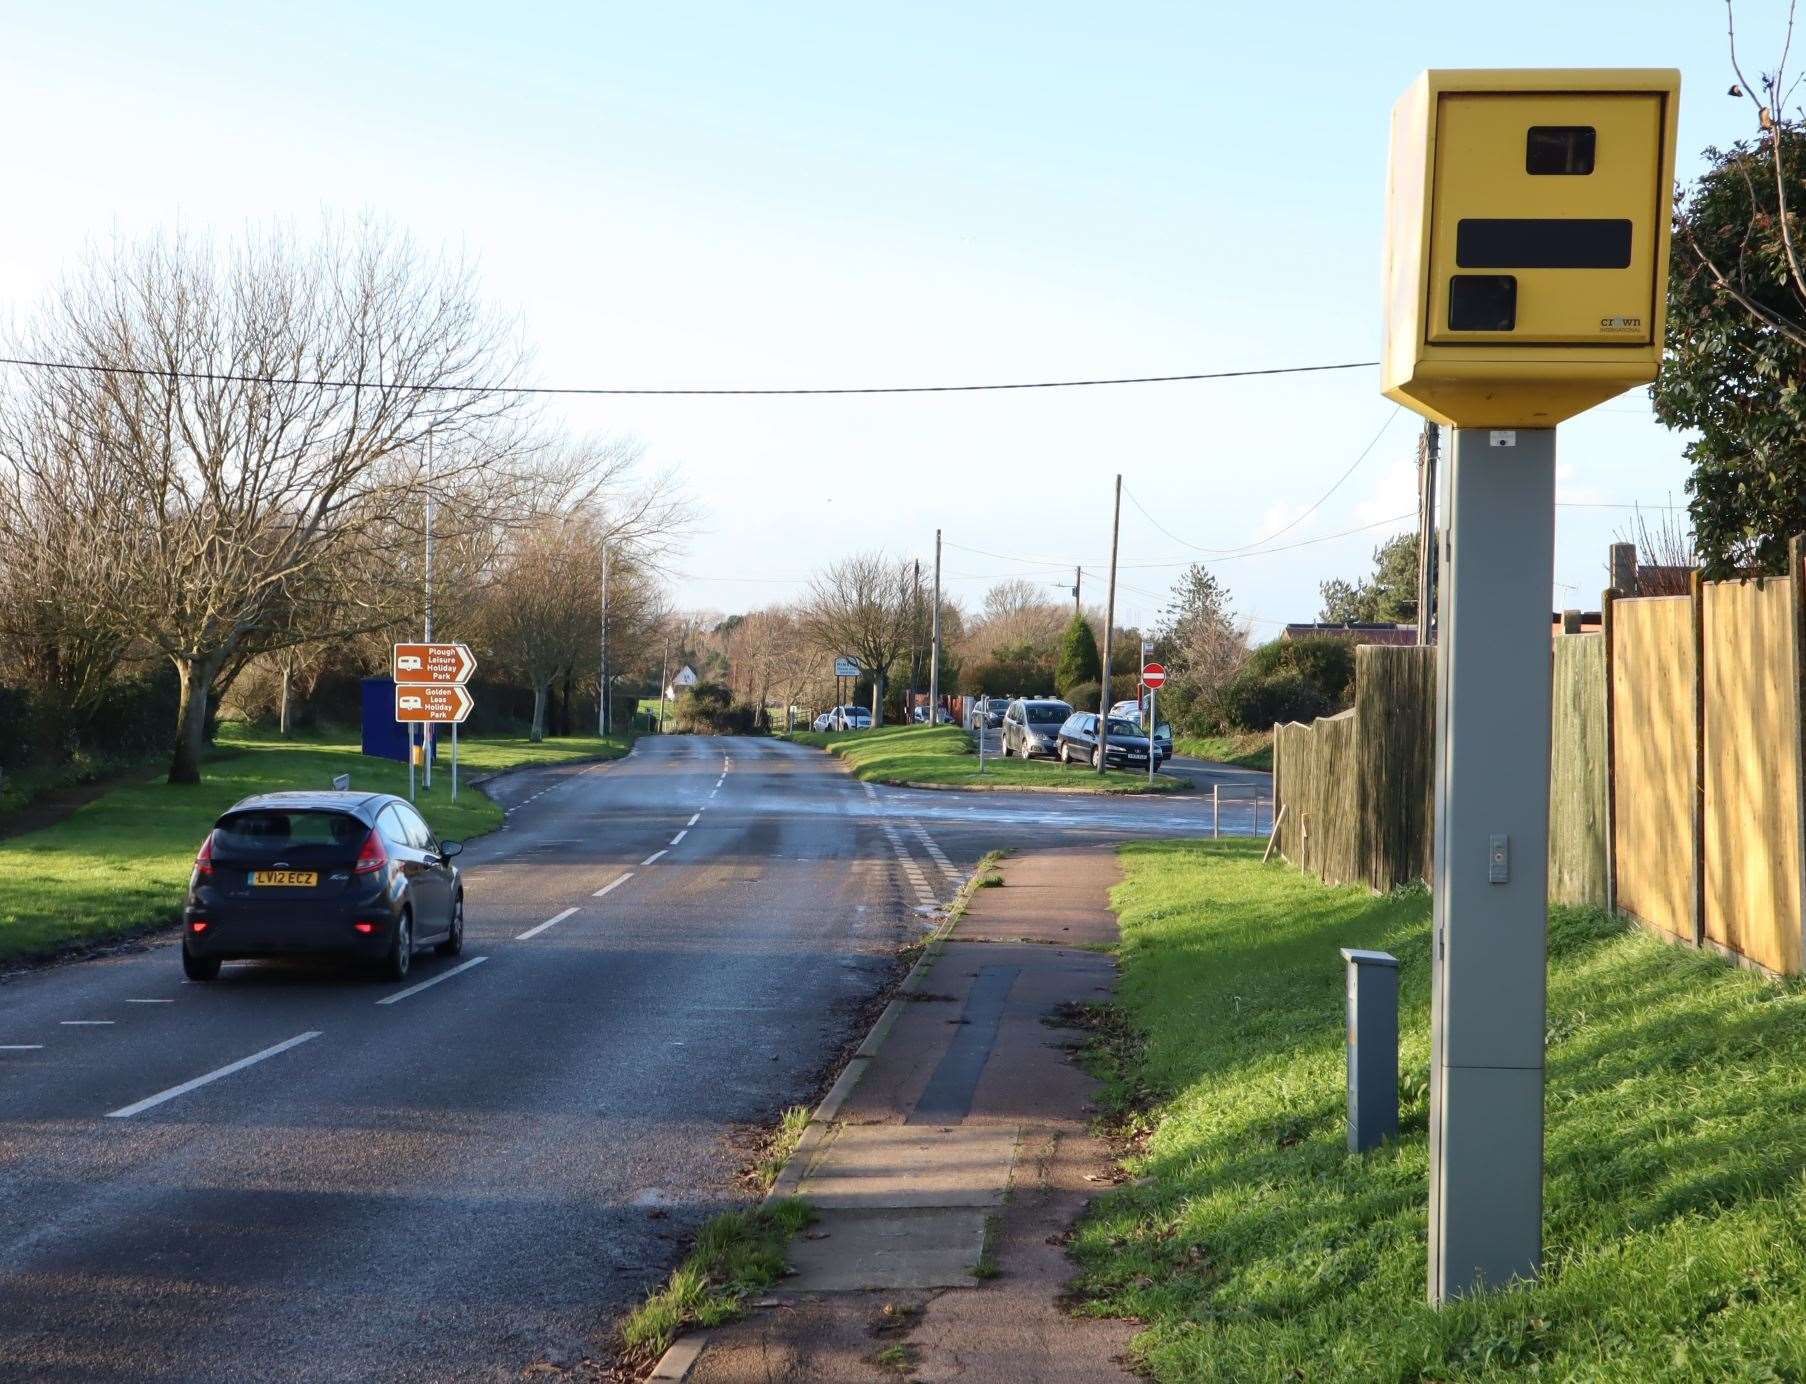 Fixed speed cameras are a common feature. Image: Stock photo.